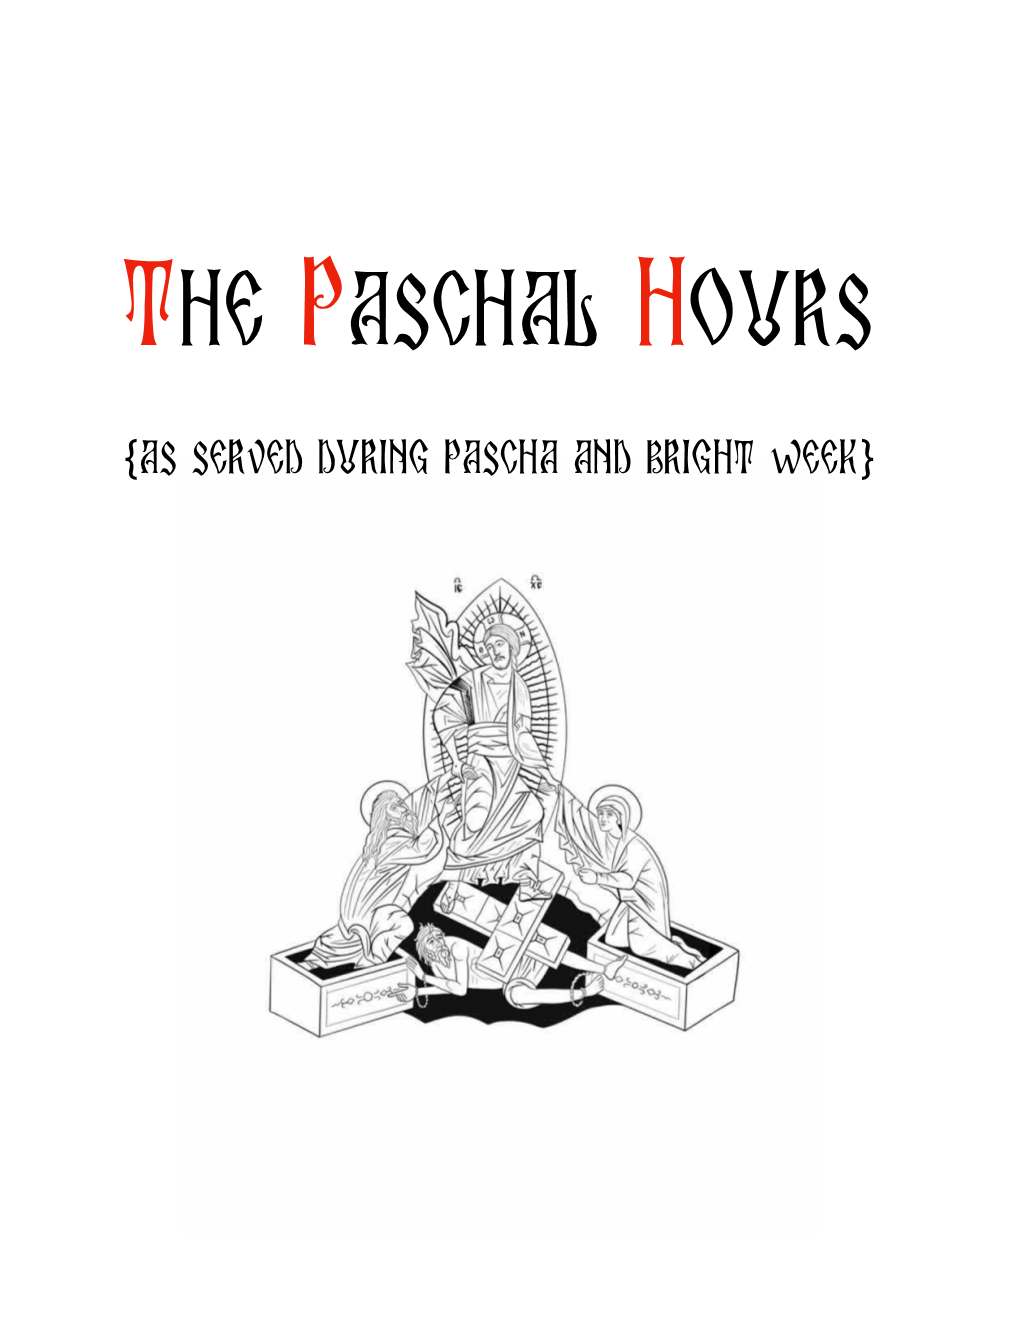 The Paschal Hours